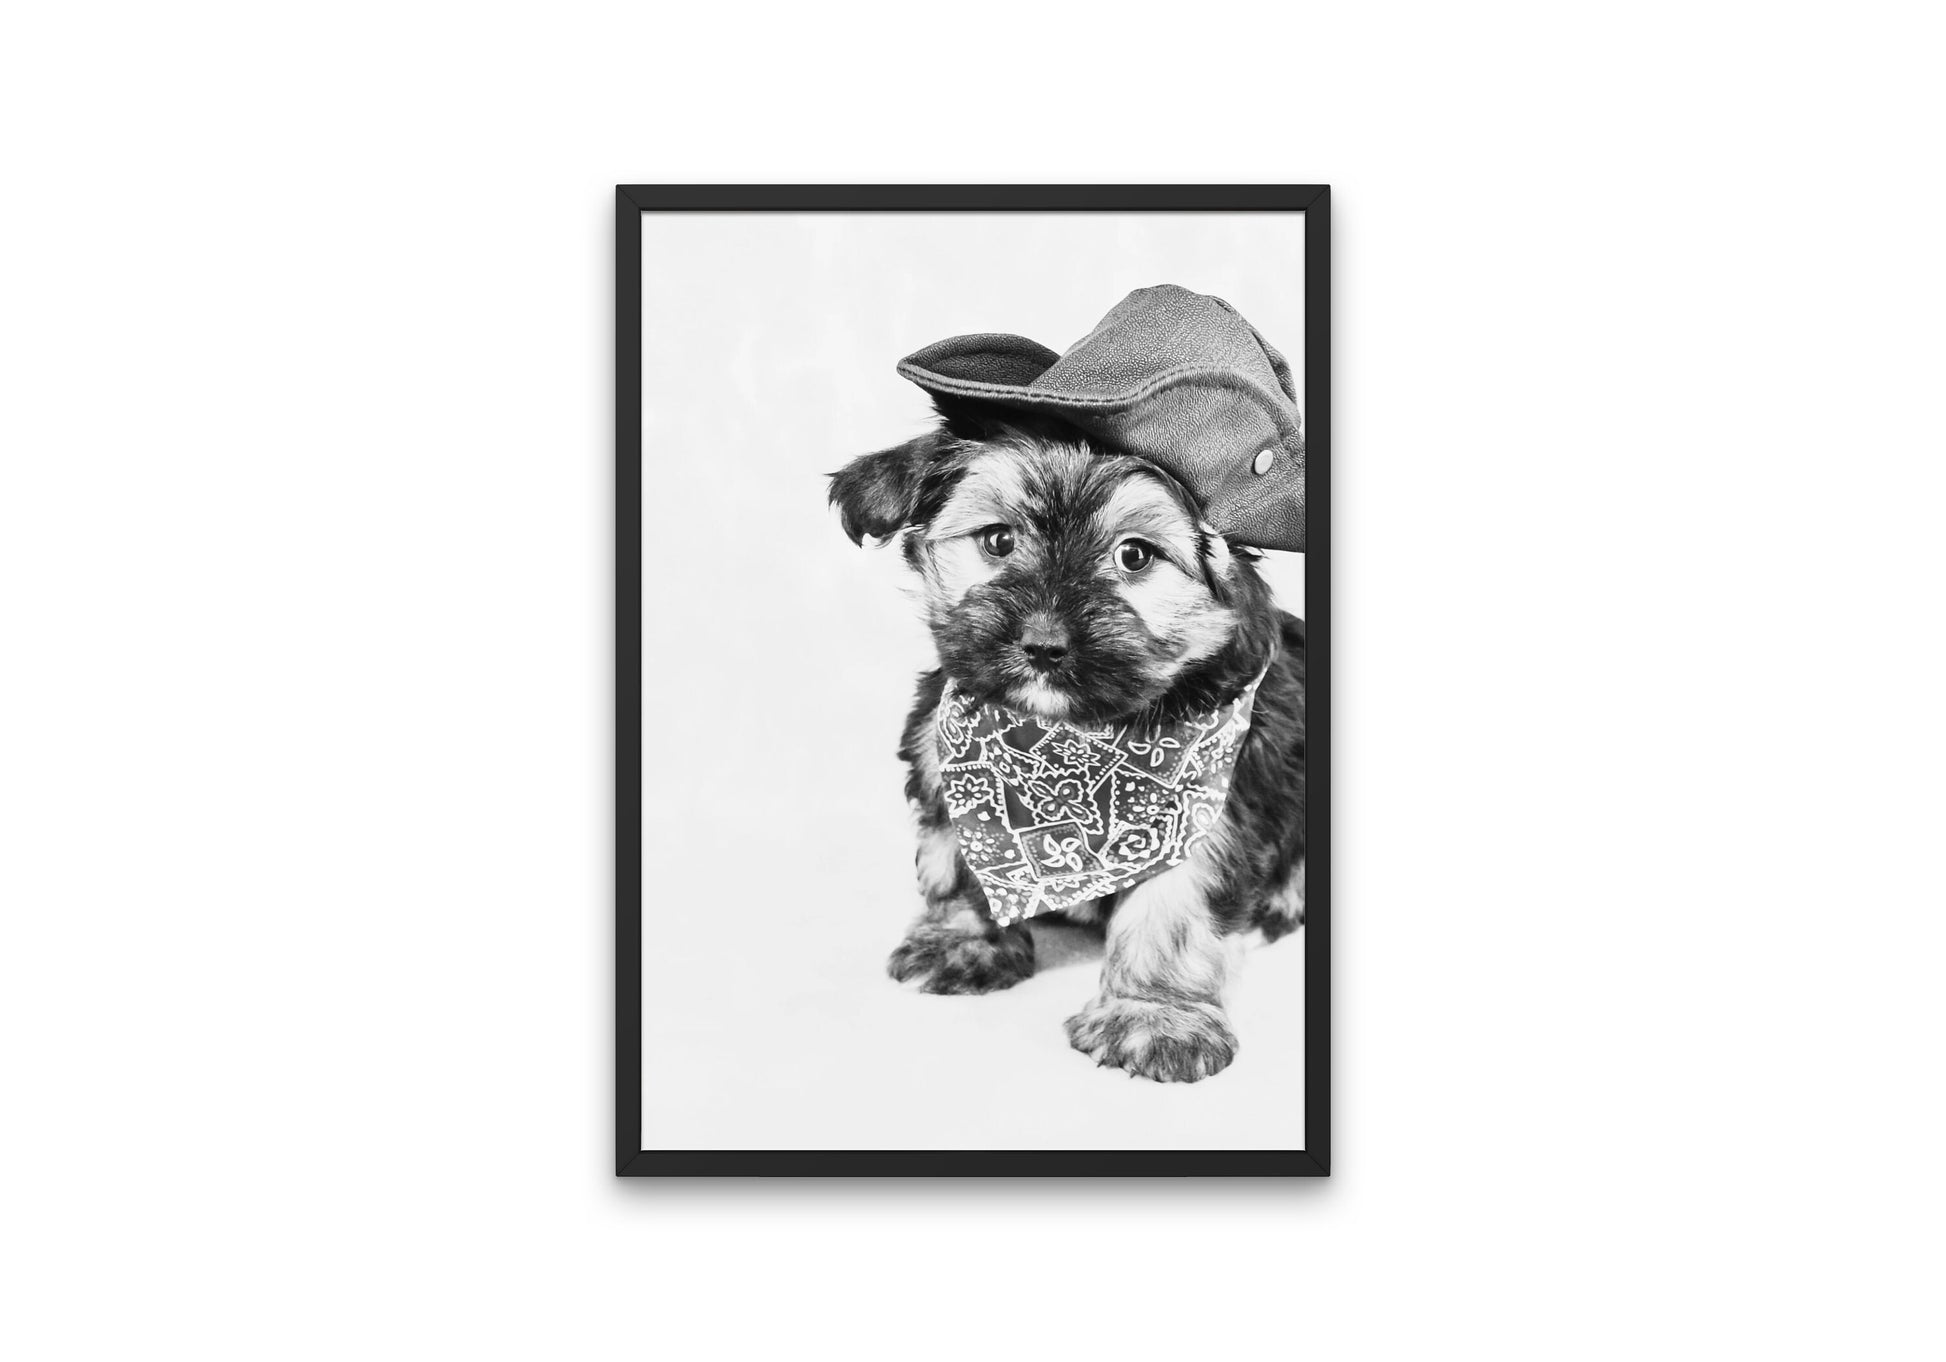 Black and White Cowboy Puppy Picture DIGITAL PRINT, Ranch Cowboy Decor, Country Animal Print, printable dog poster, funny dog portrait, b&w